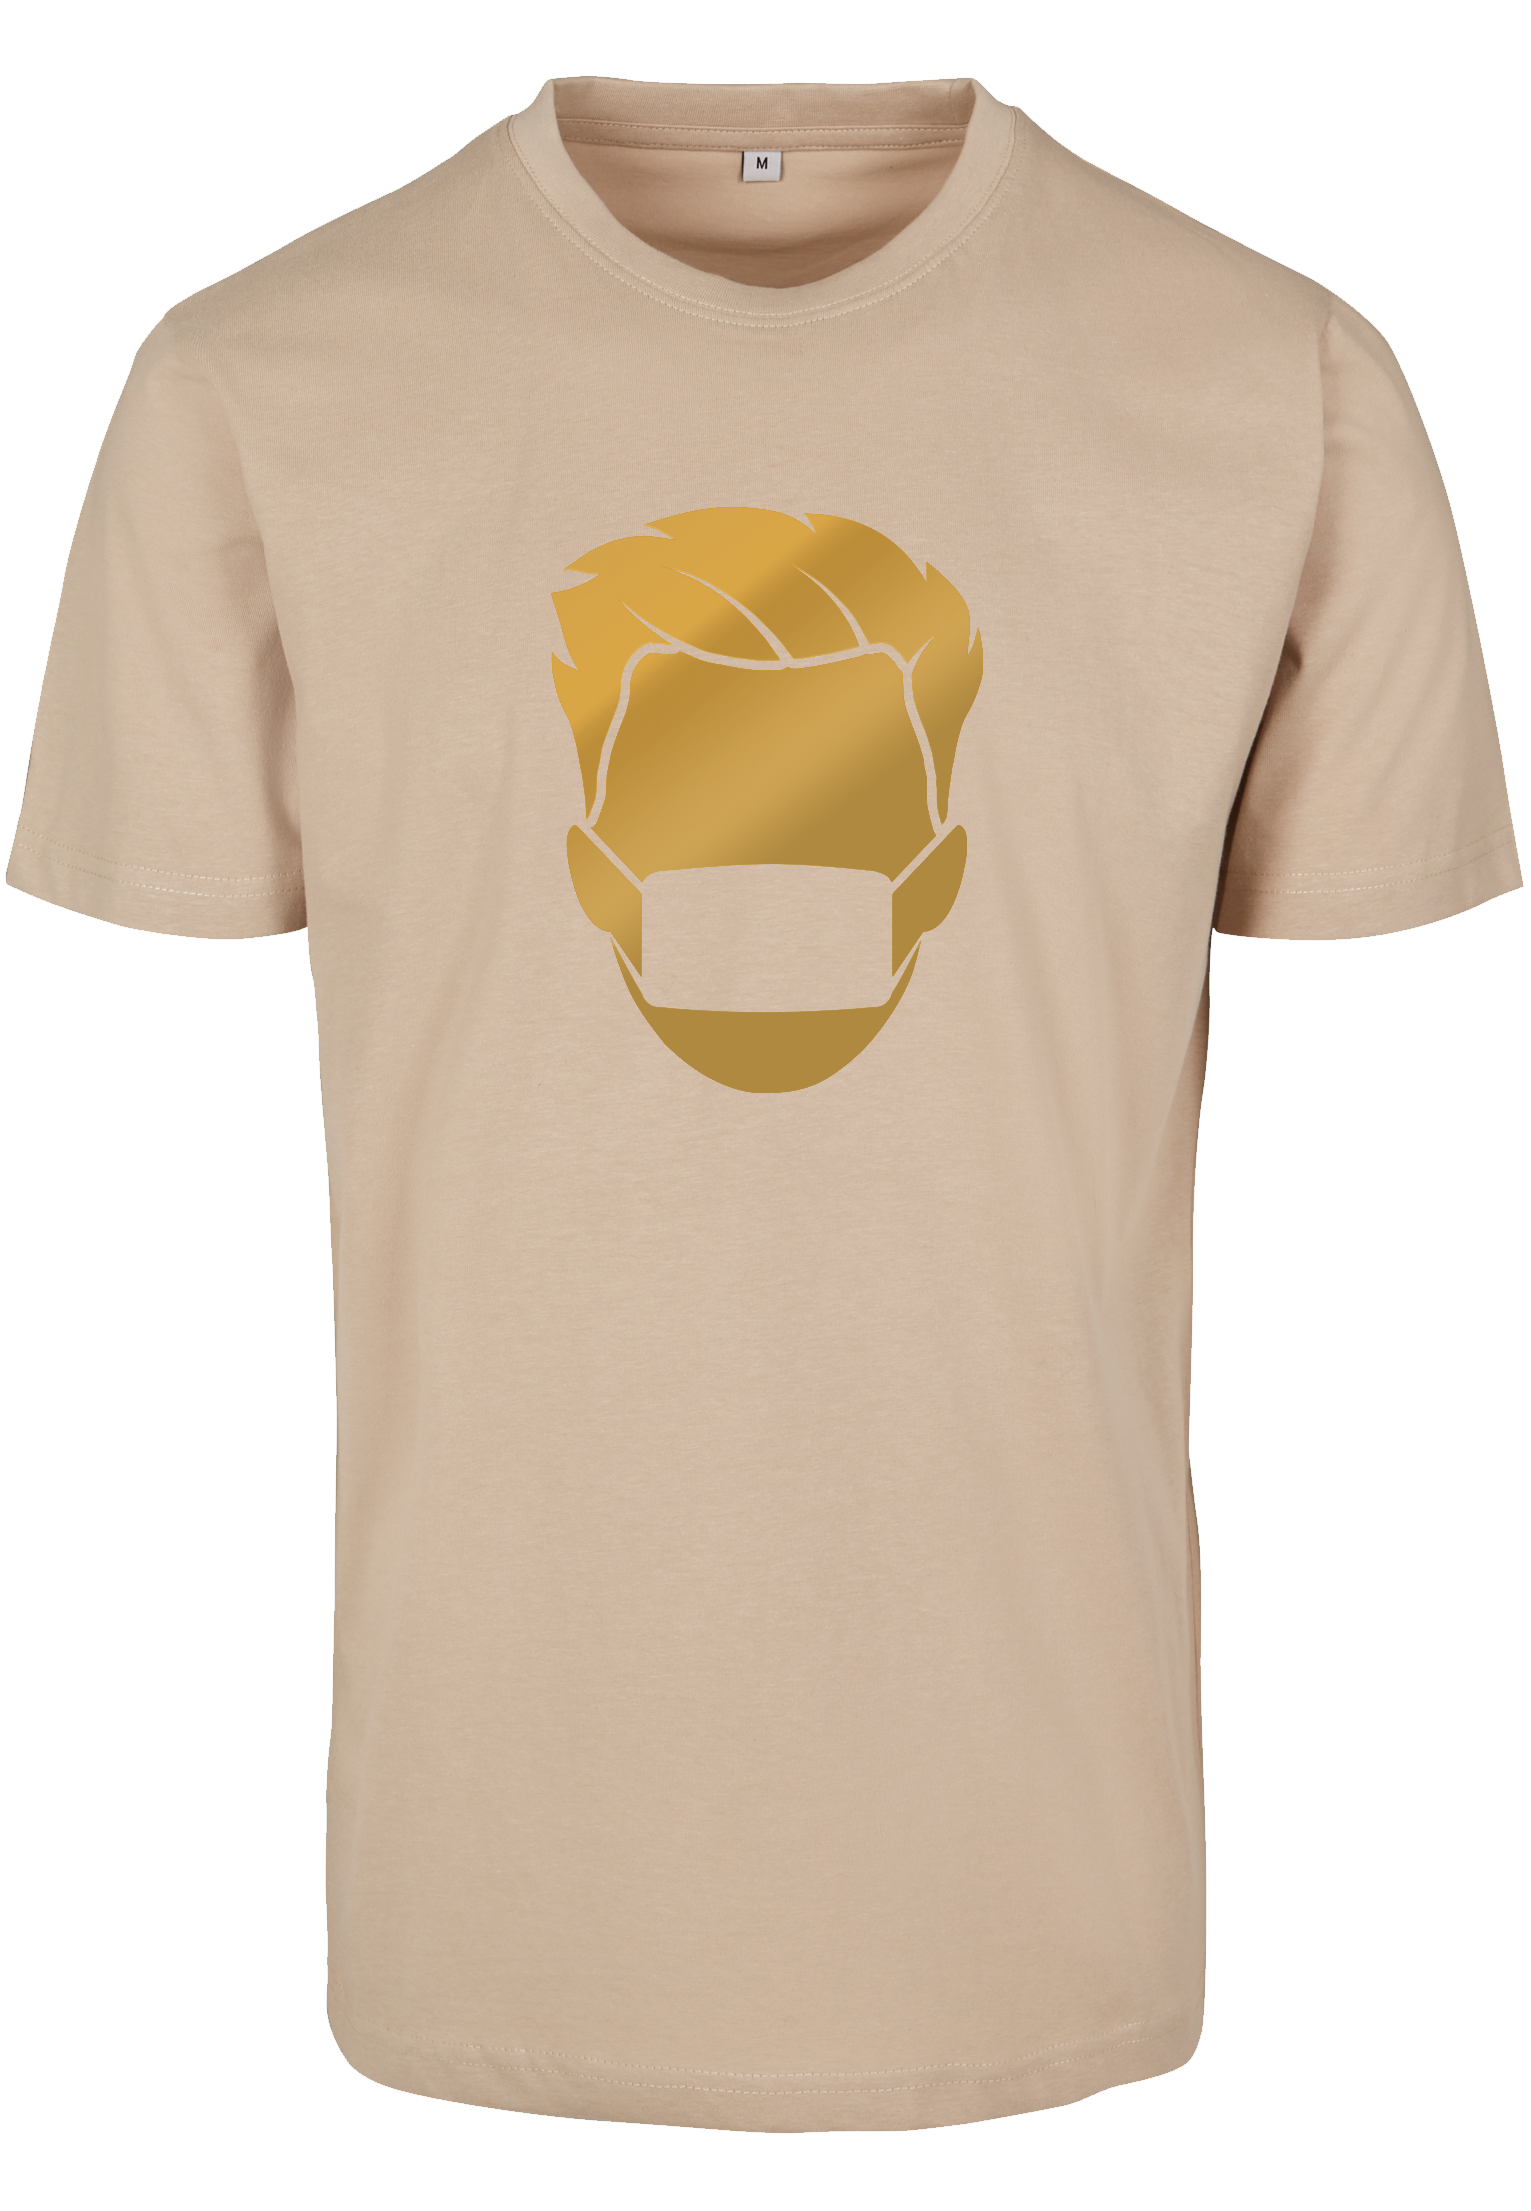 Goldcoly sand T-Shirt